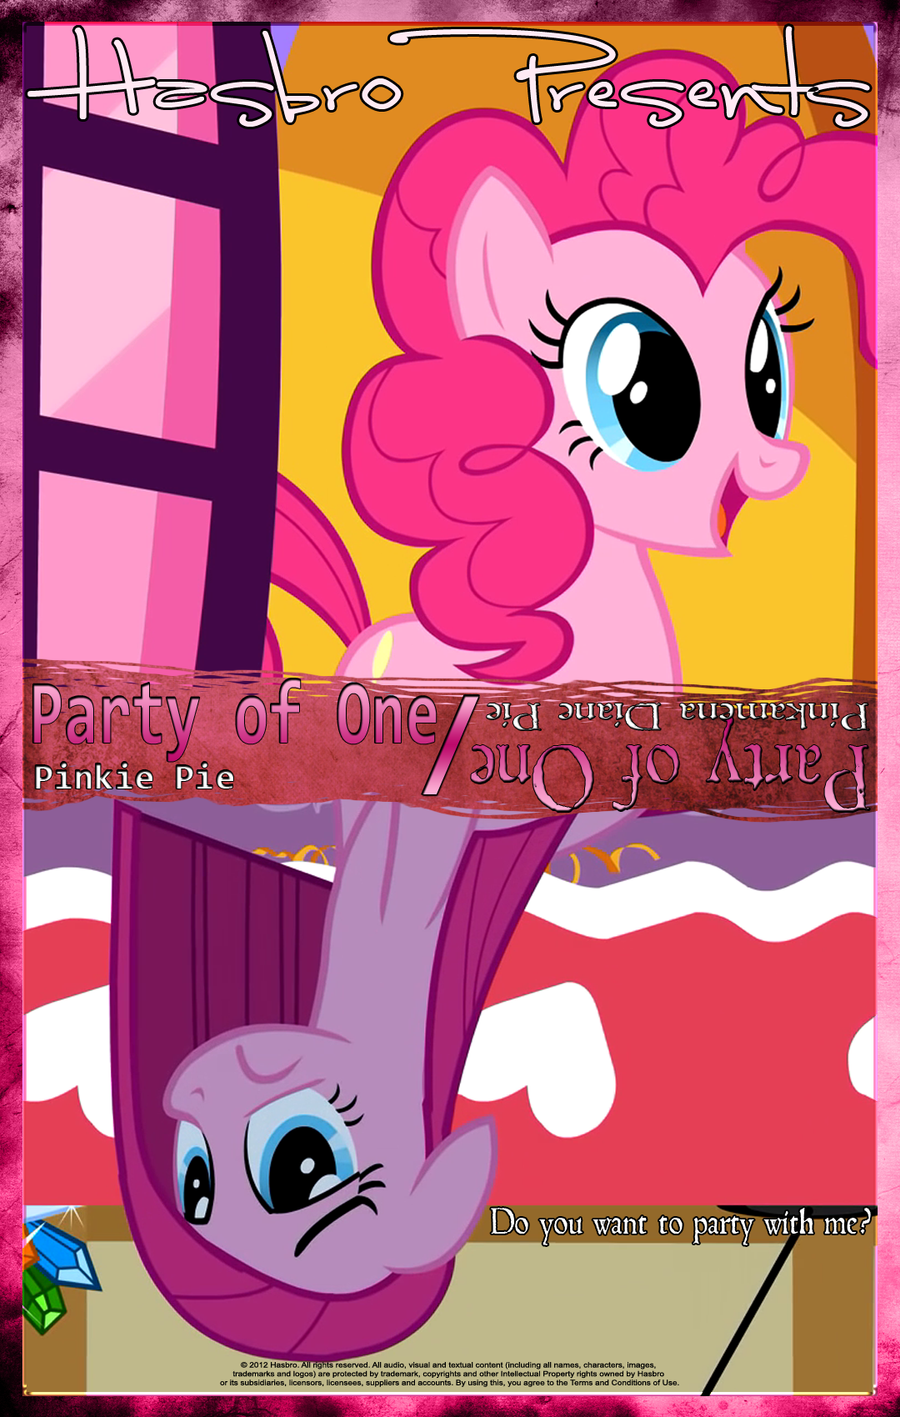 mlp___party_of_one___movie_poster_by_pims1978-d5637tc.png